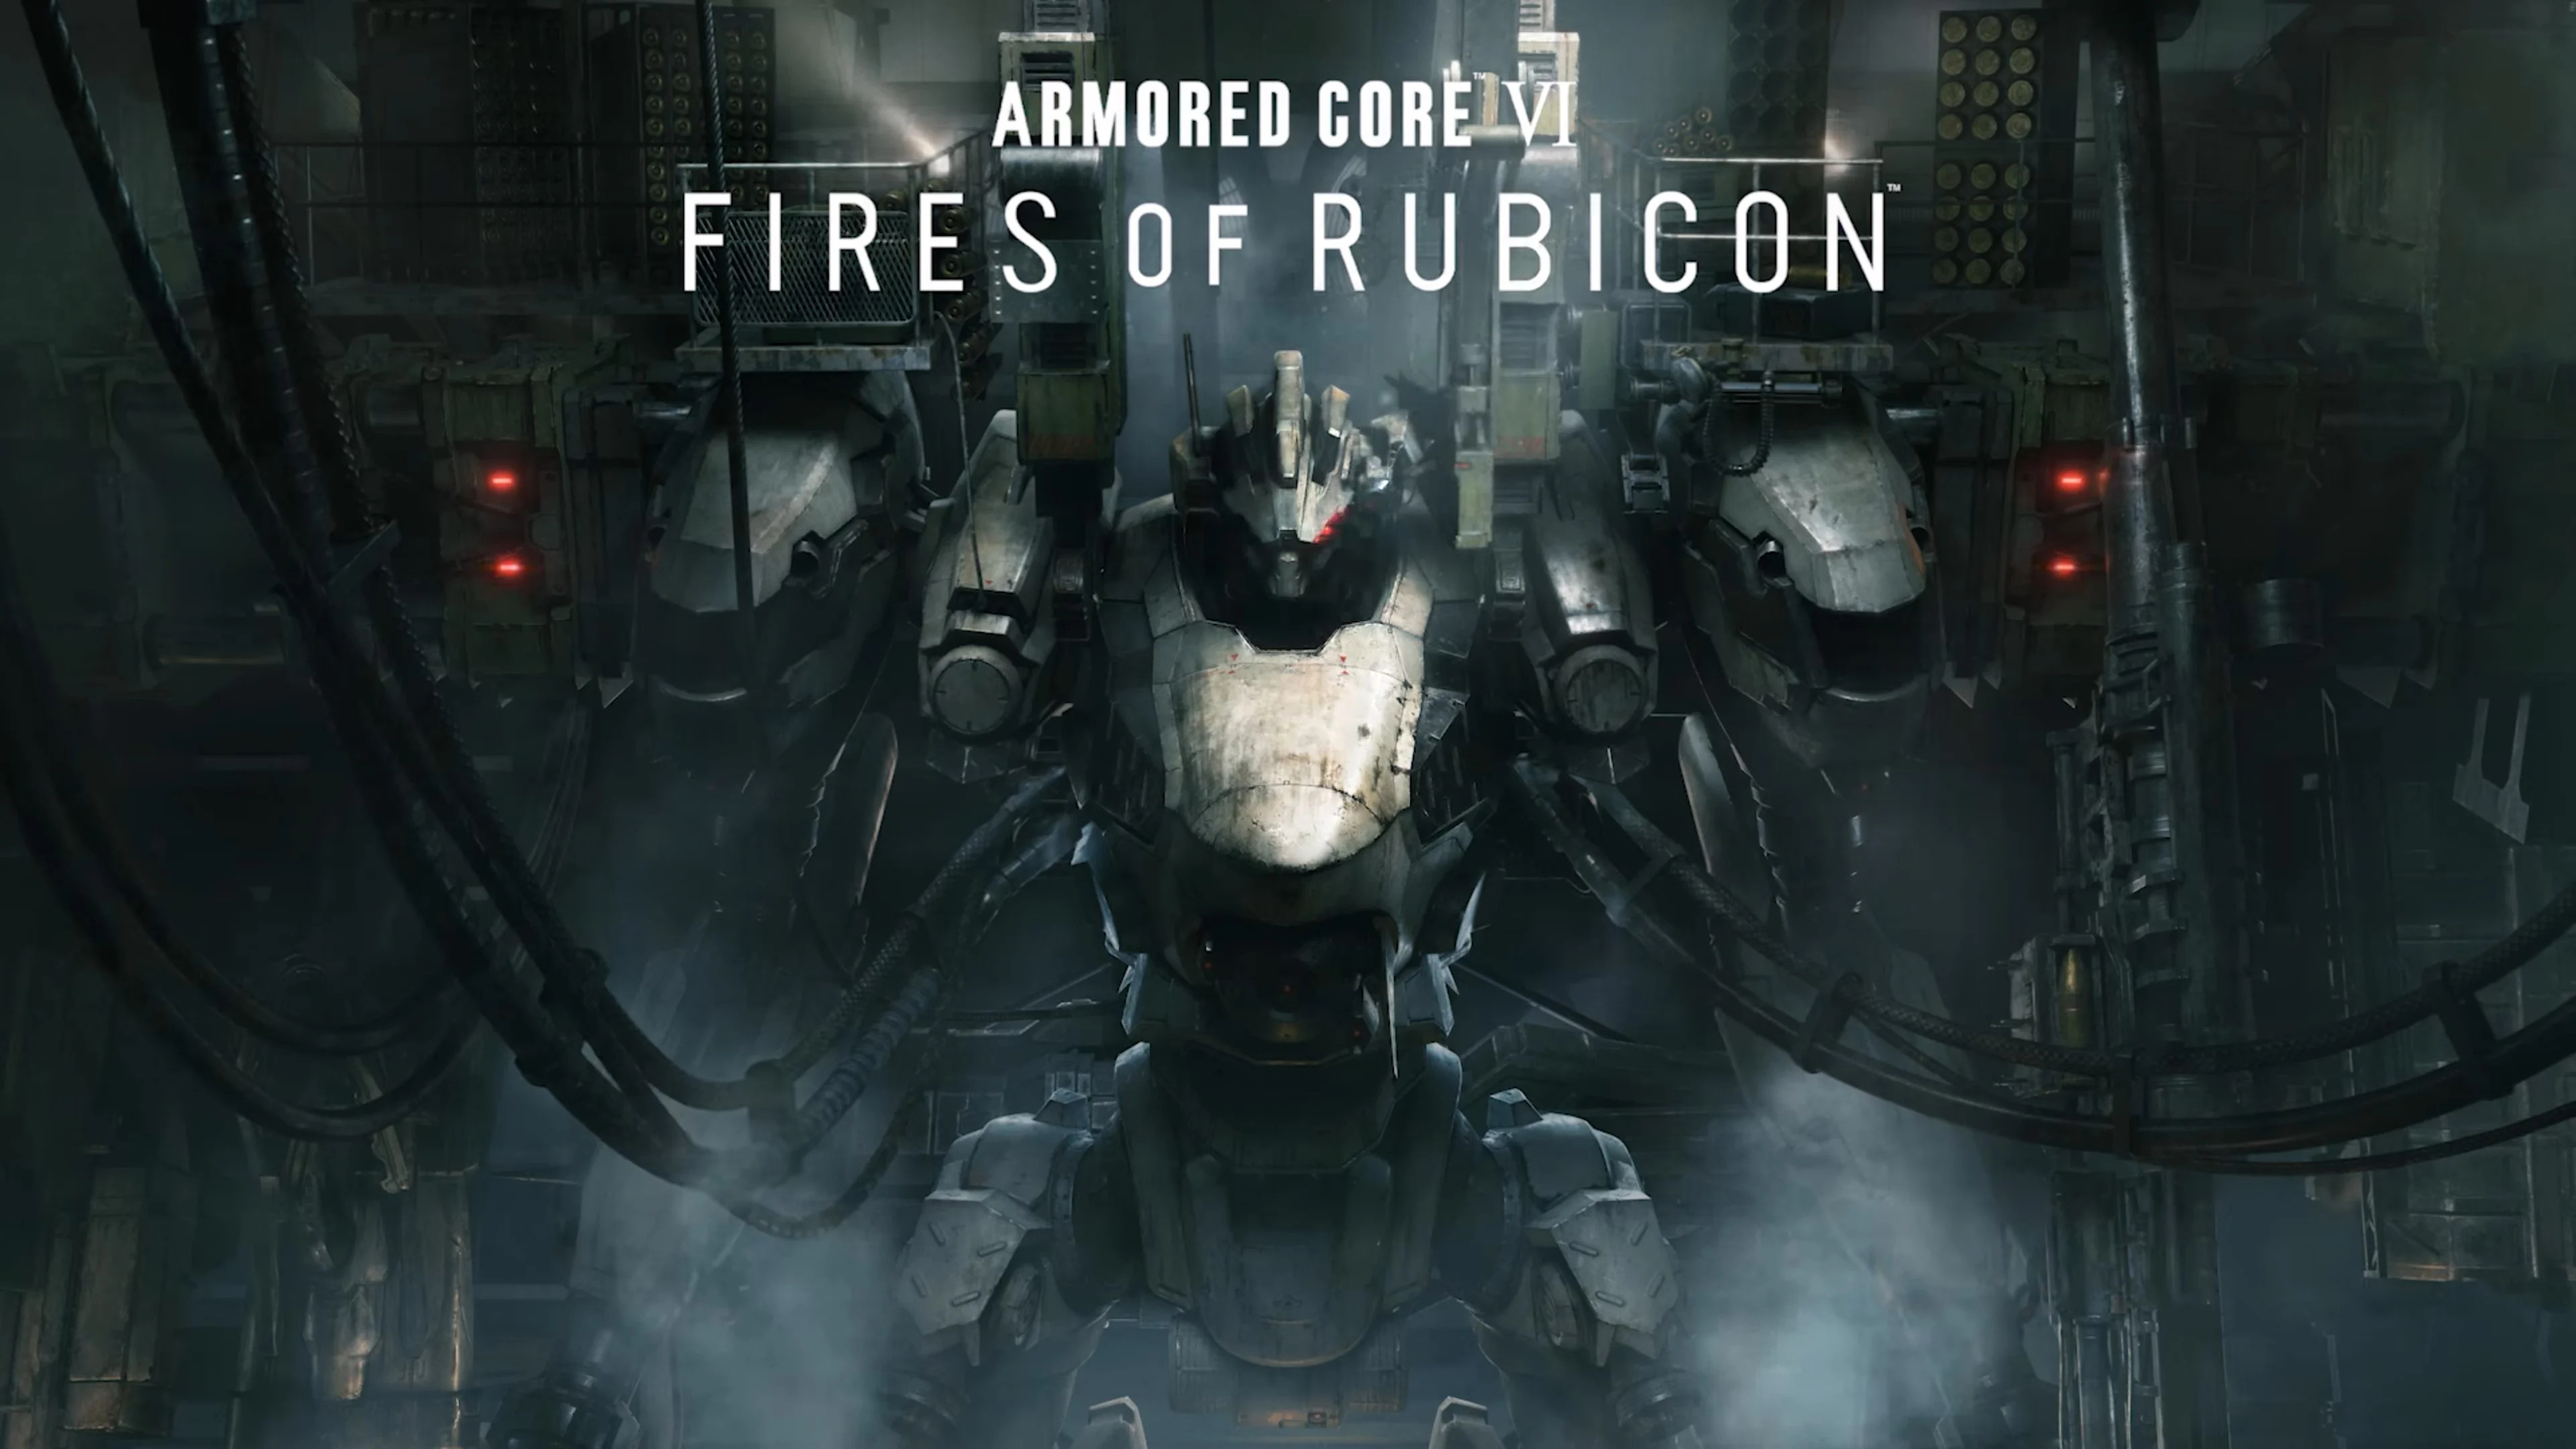 Core 6 игра. Armored Core 6. Armored Core FROMSOFTWARE. Armored Core vi: Fires of Rubicon. Трейлер игры про роботов.